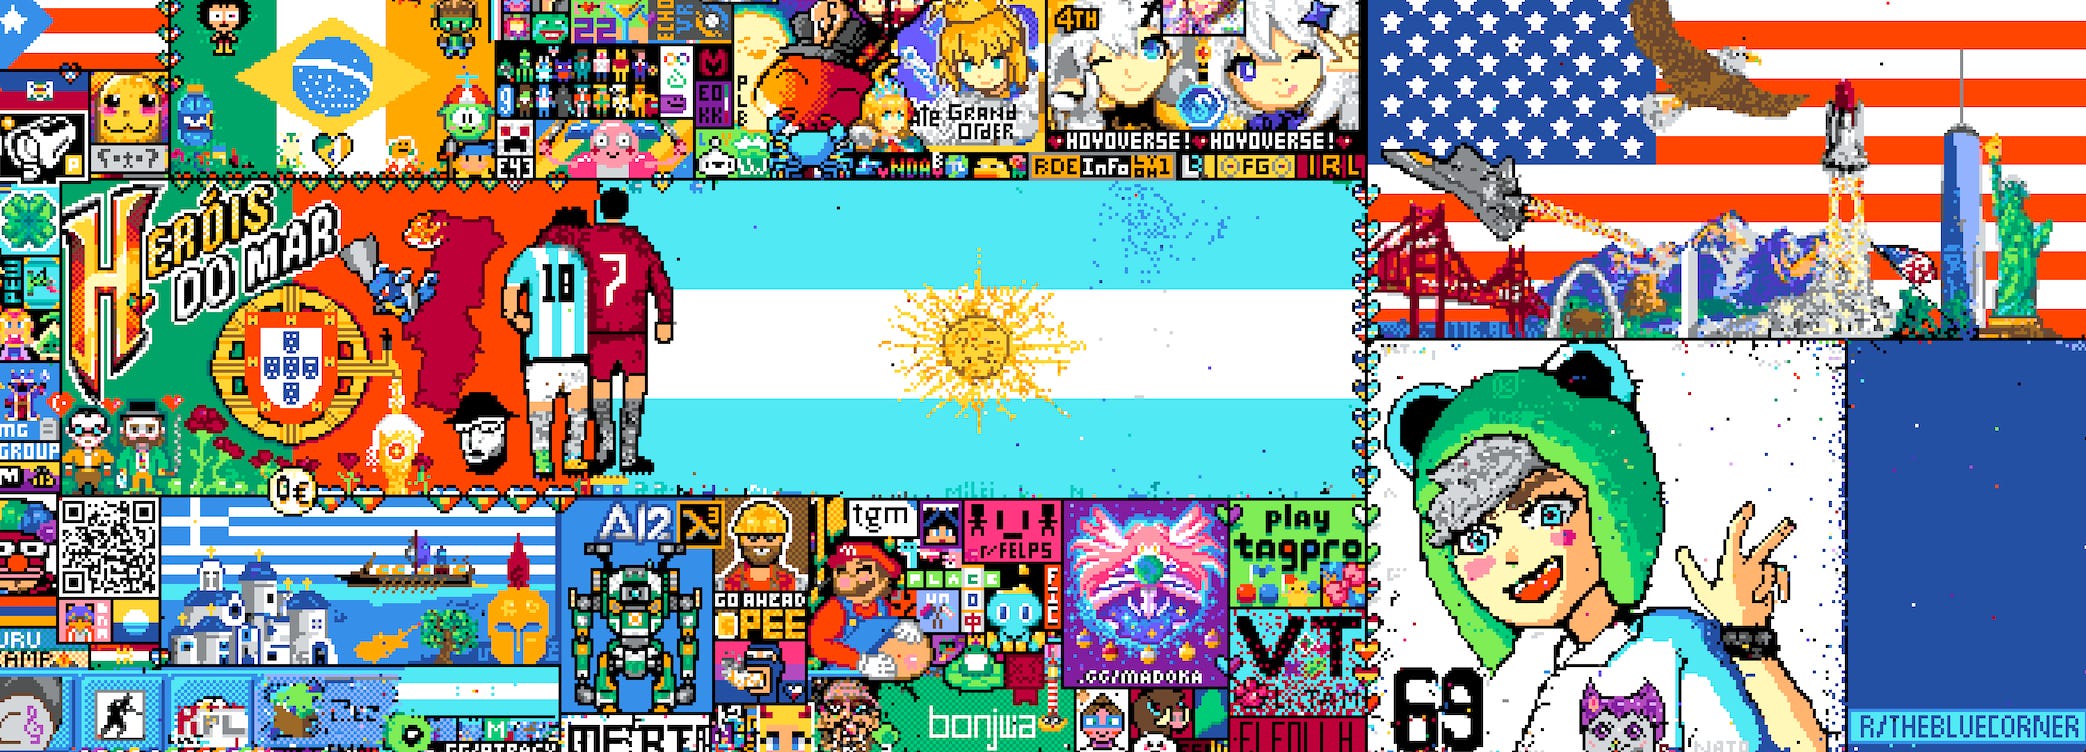 More of the chaotic r/place canvas, with a large blue rectangle in the bottom right corner, and a recreation of the Argentinian flag.